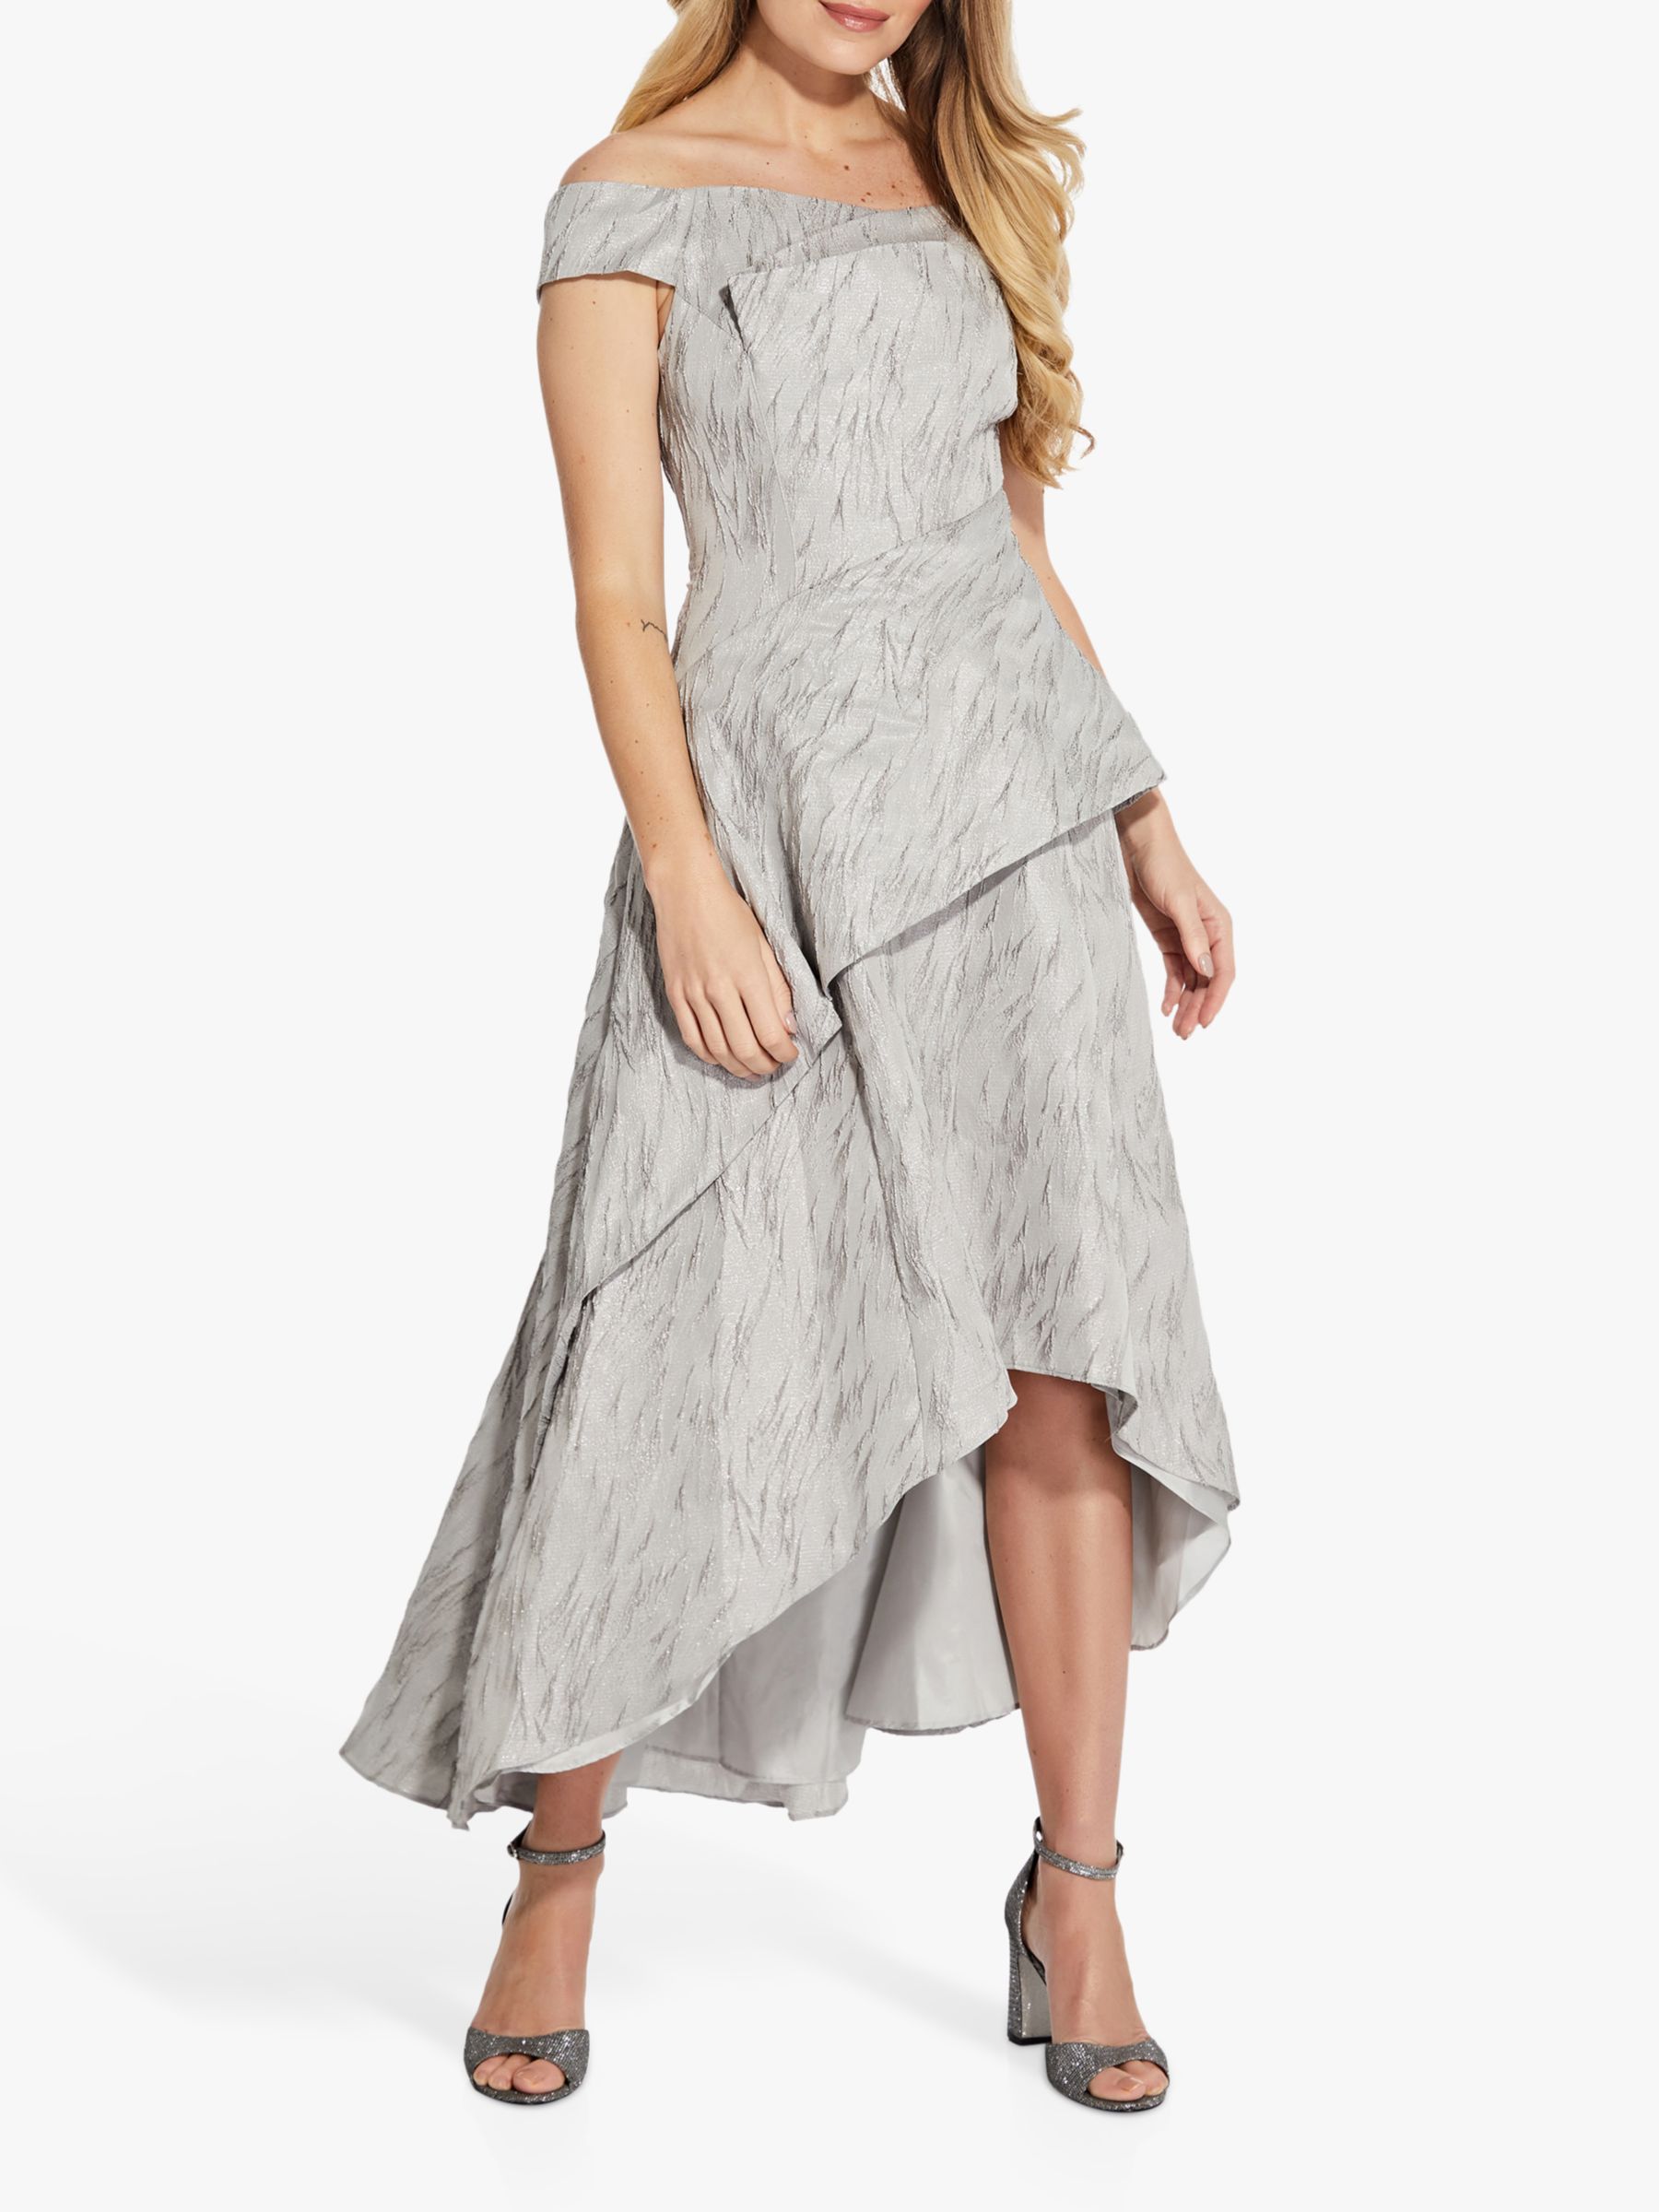 Adrianna Papell Textured Draped Dress, Silver